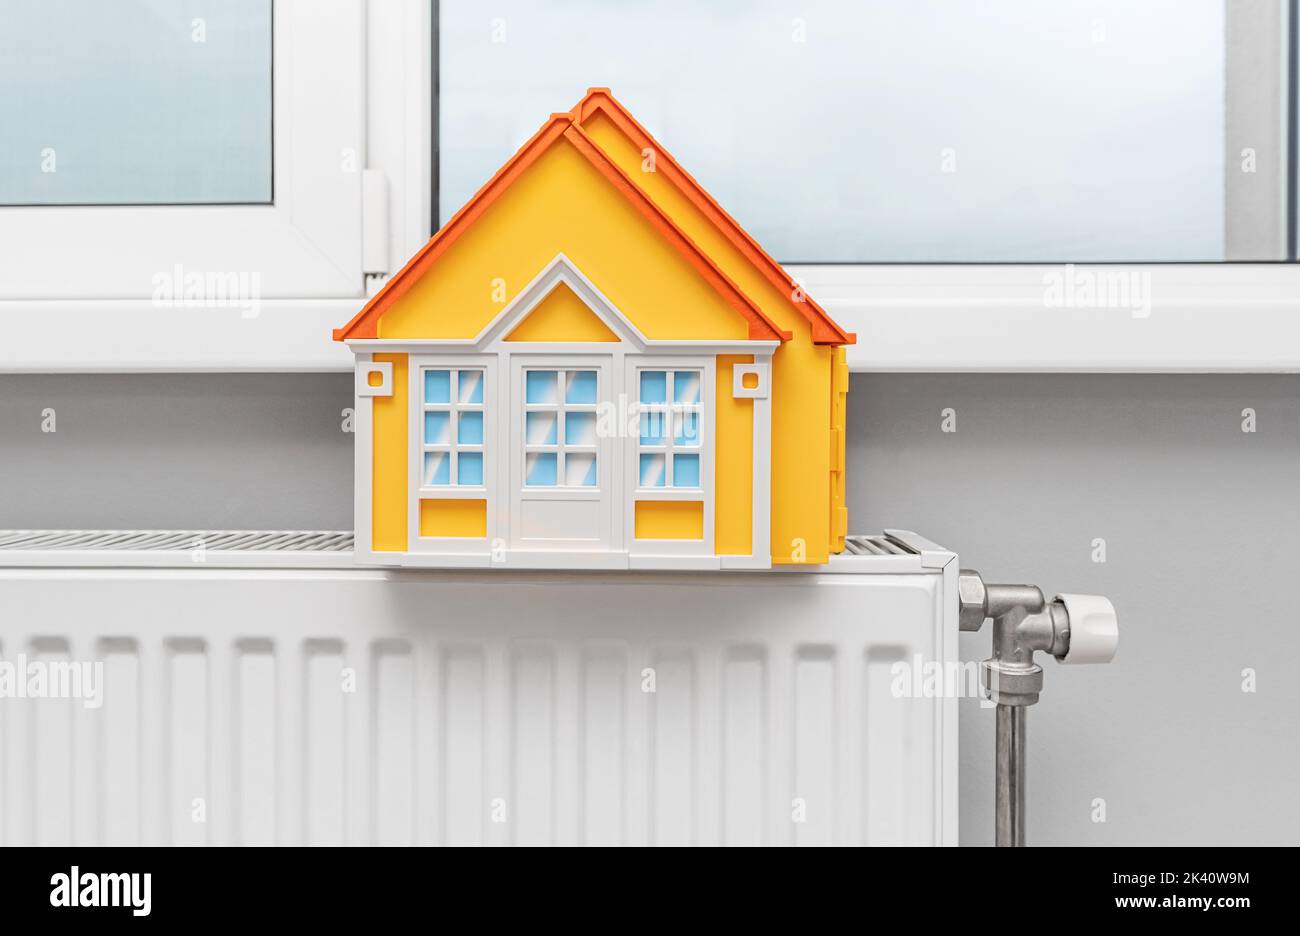 Model of a house on a radiator. Providing warmth during the cold season. Stock Photo